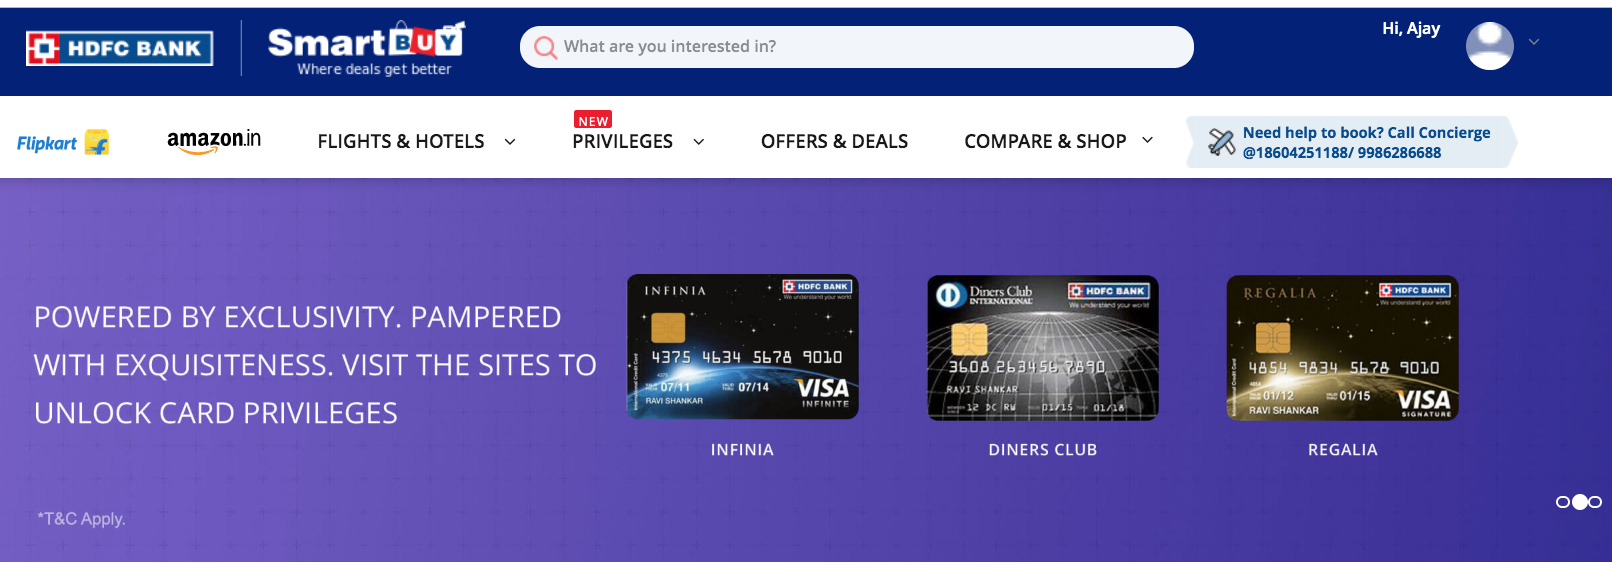 Hdfc Bank Credit Card Points Can Be Redeemed For Flights By Many More Cardholders Live From A Lounge